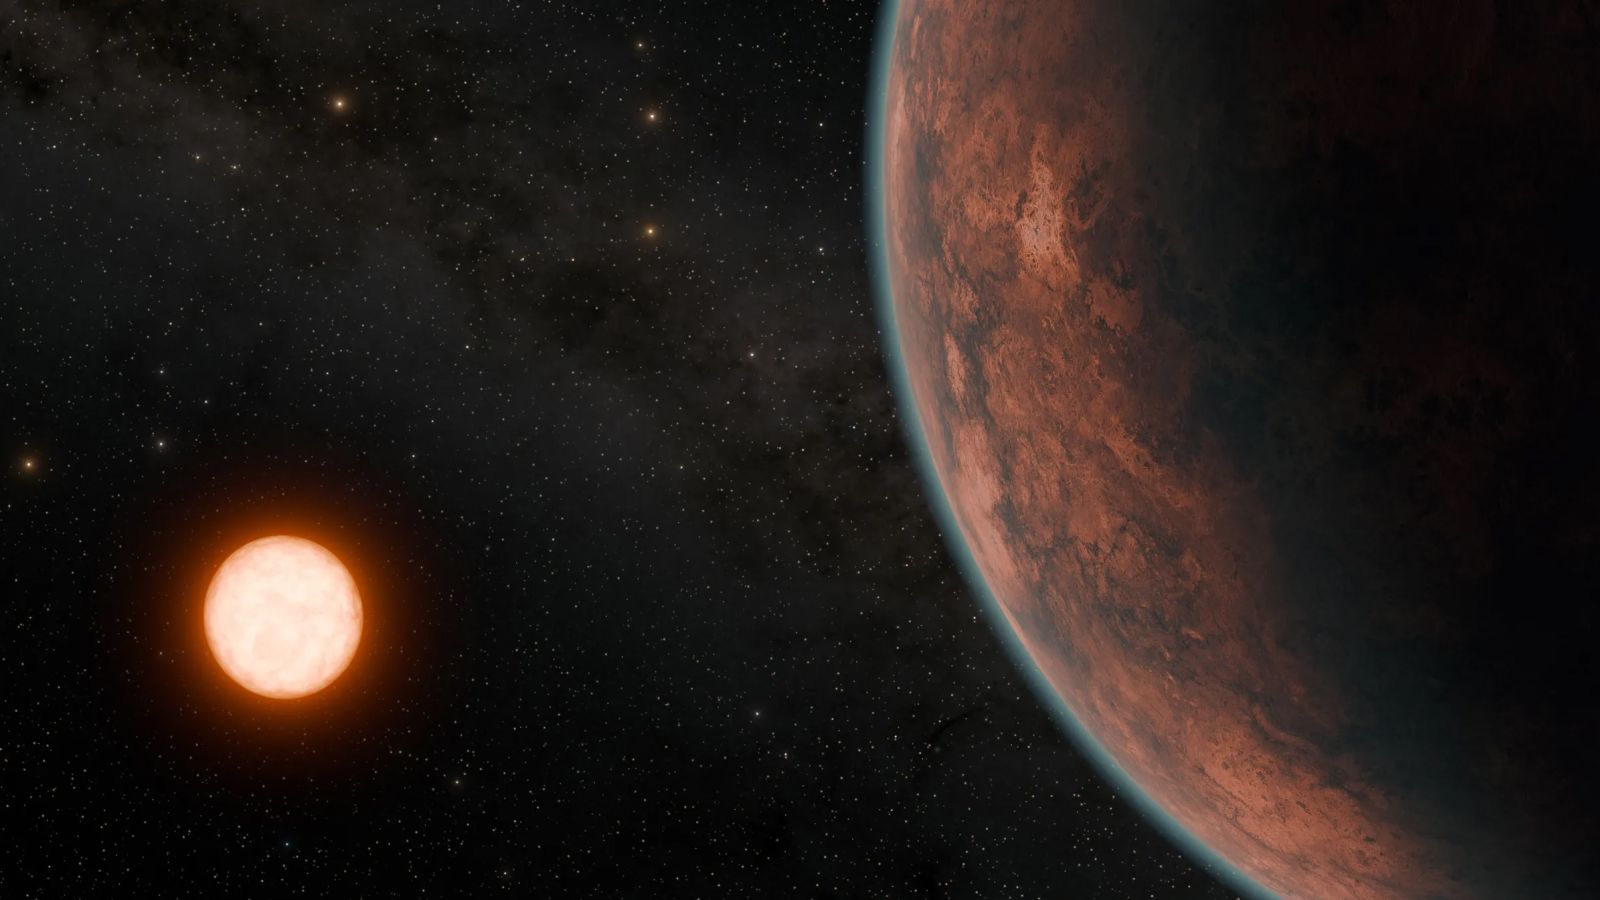 Scientists have discovered an Earth-sized planet that could support life